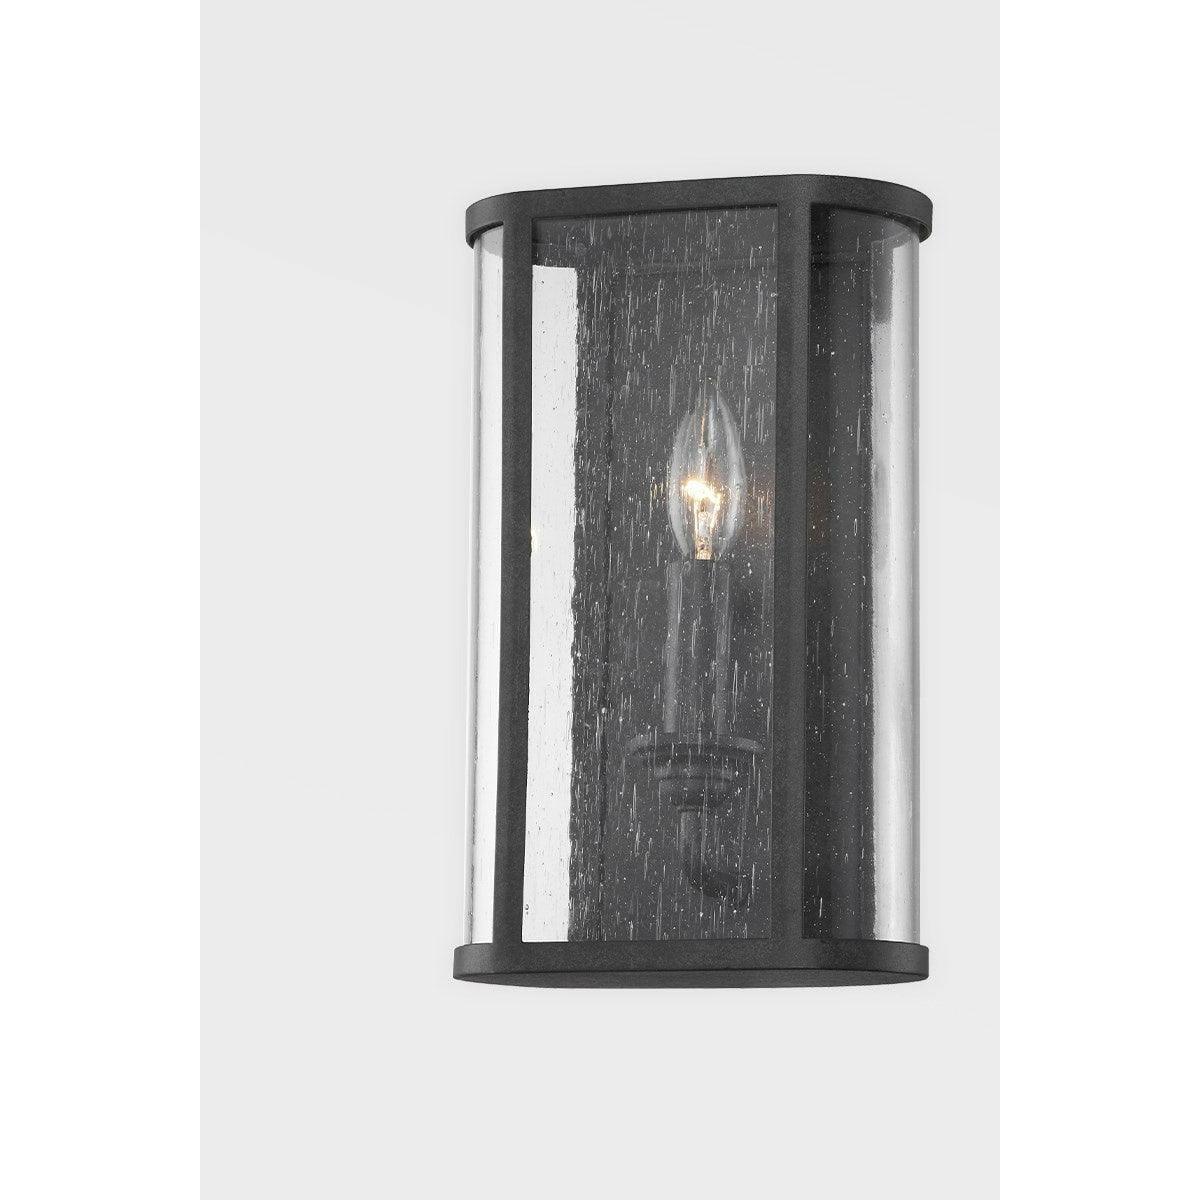 Troy Lighting - Chace Wall Sconce - B3402-FRN | Montreal Lighting & Hardware